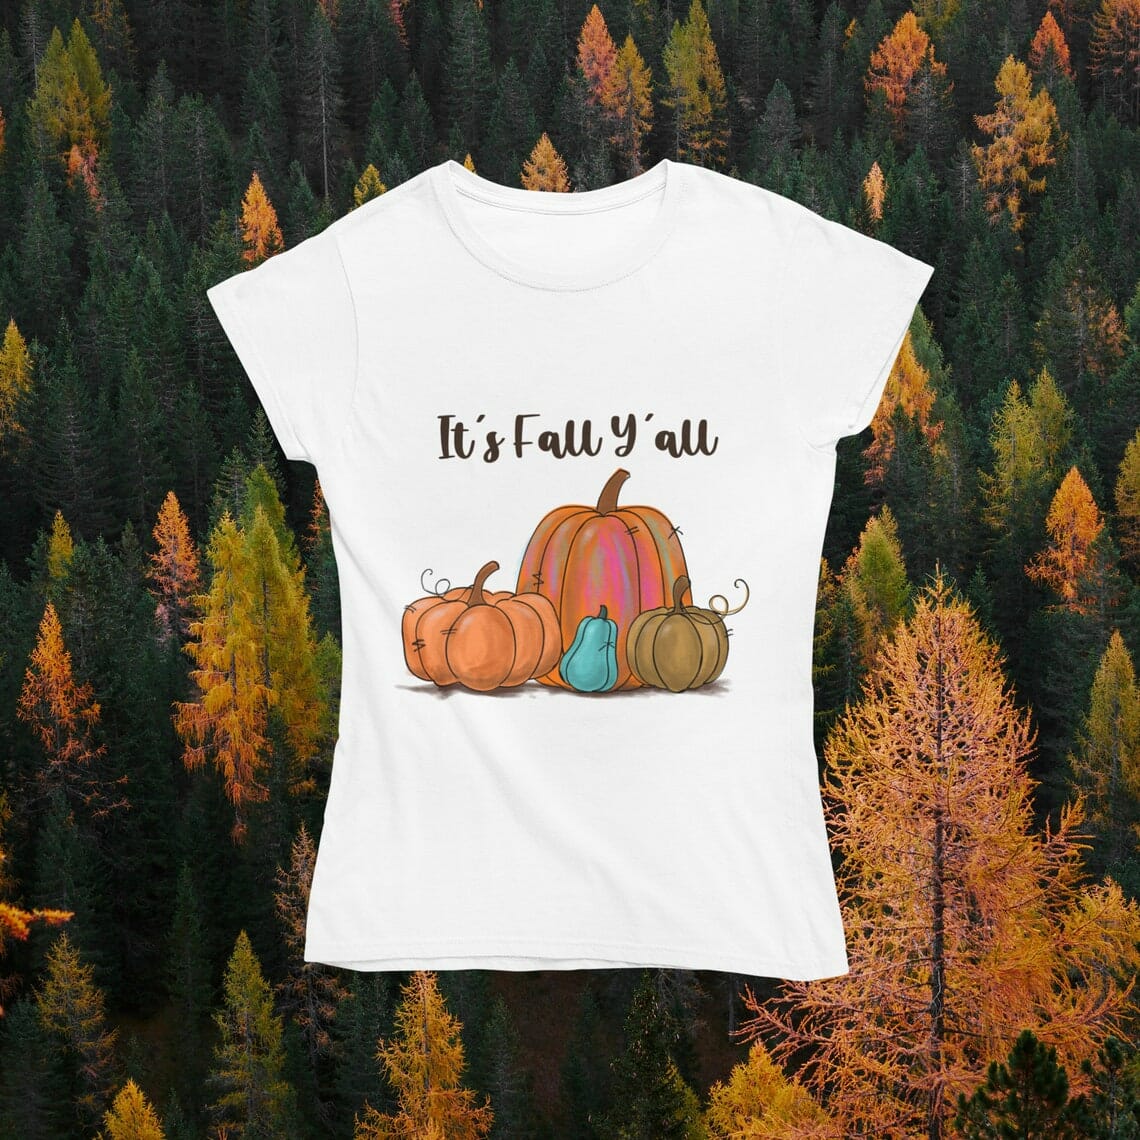 Printable on T-Shirt|It's Fall Y'all Sublimation PNG